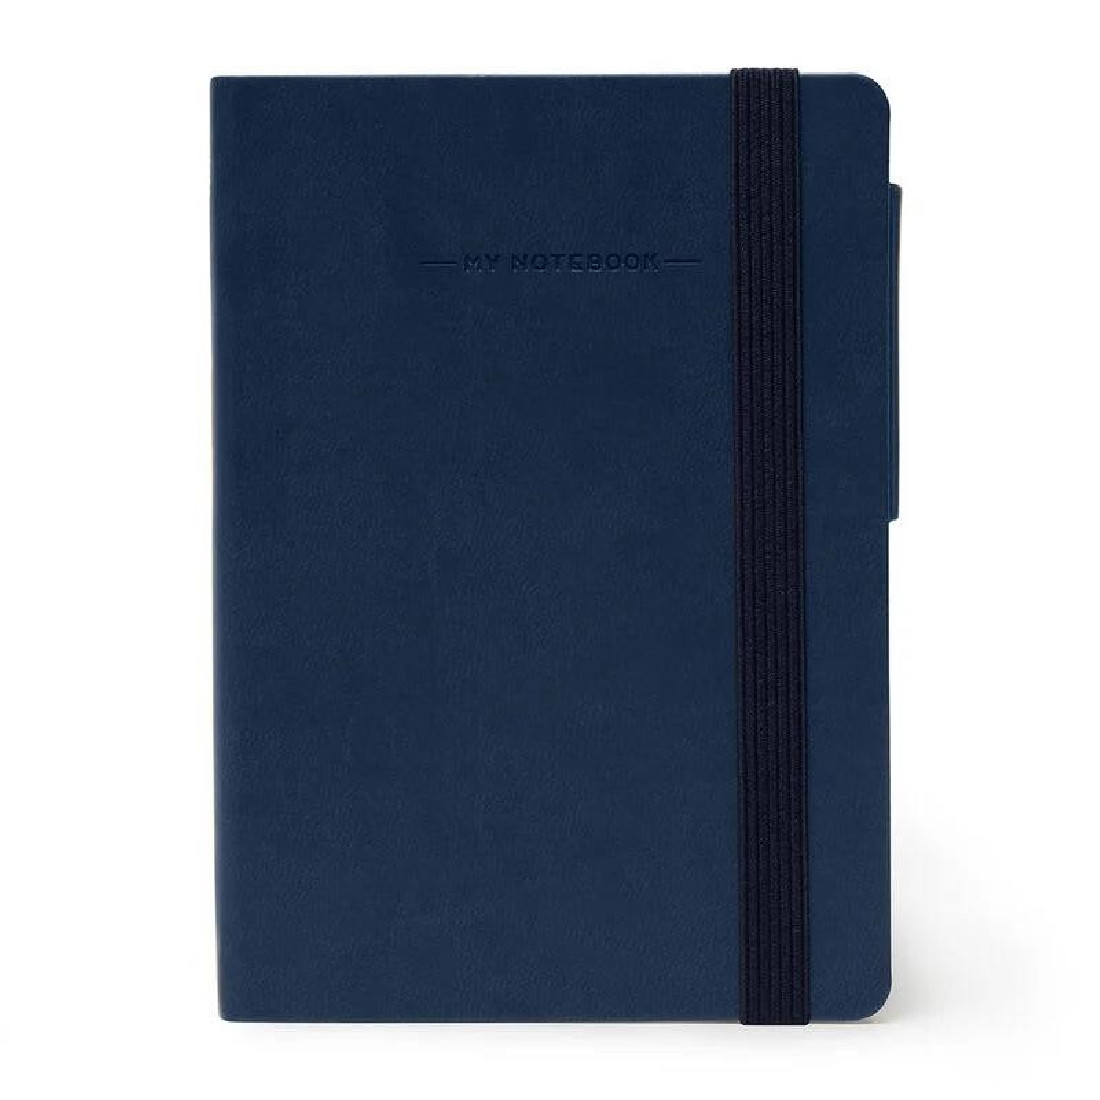 My Notebook - Lined - Small - Blue Cover LEGAMI